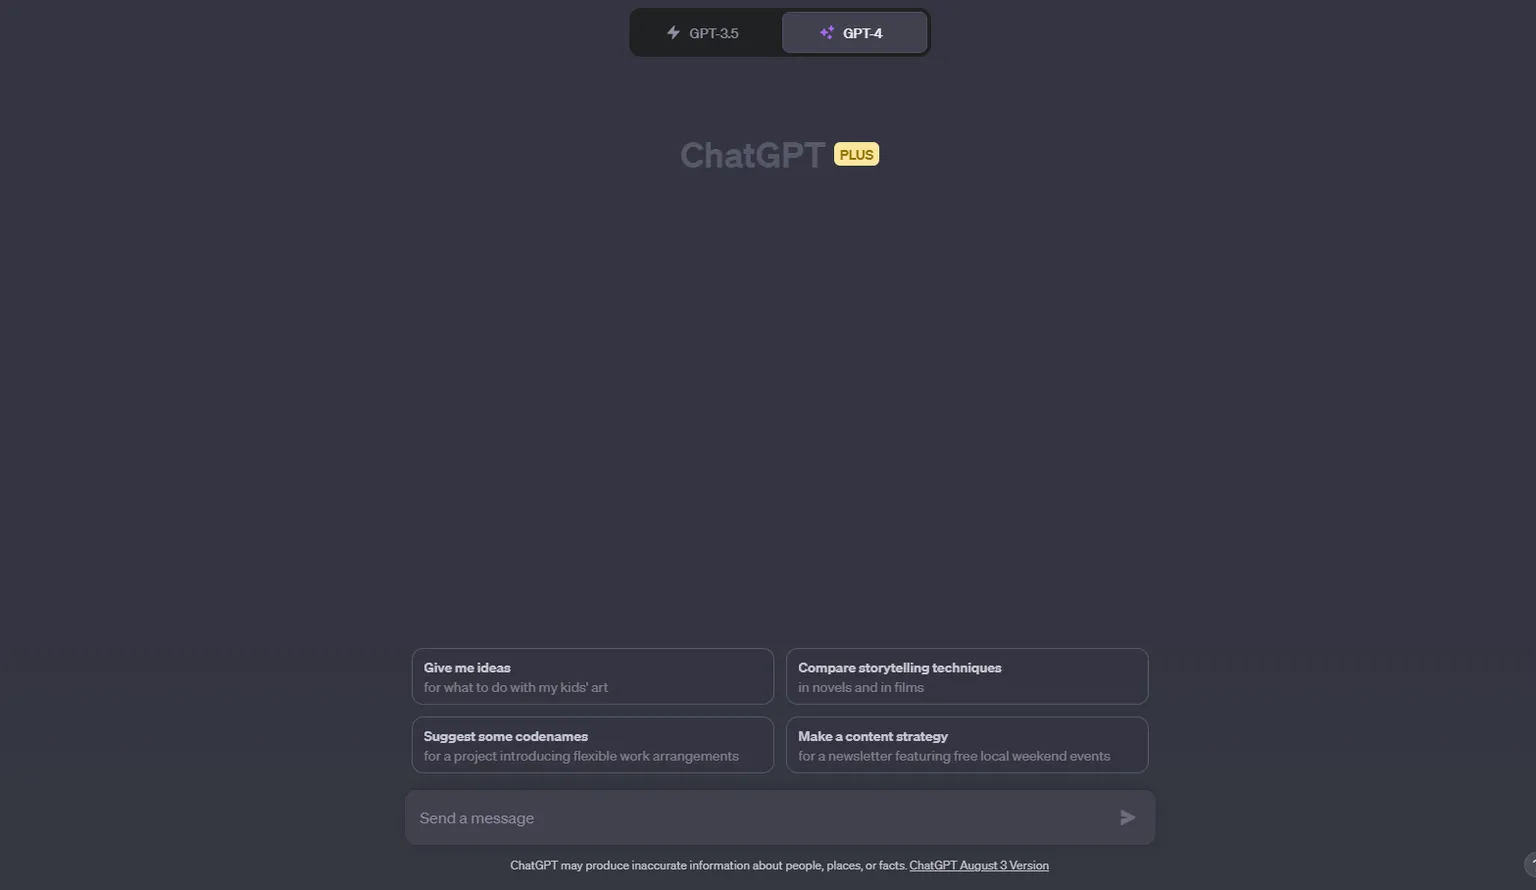 ChatGPT’s new interface